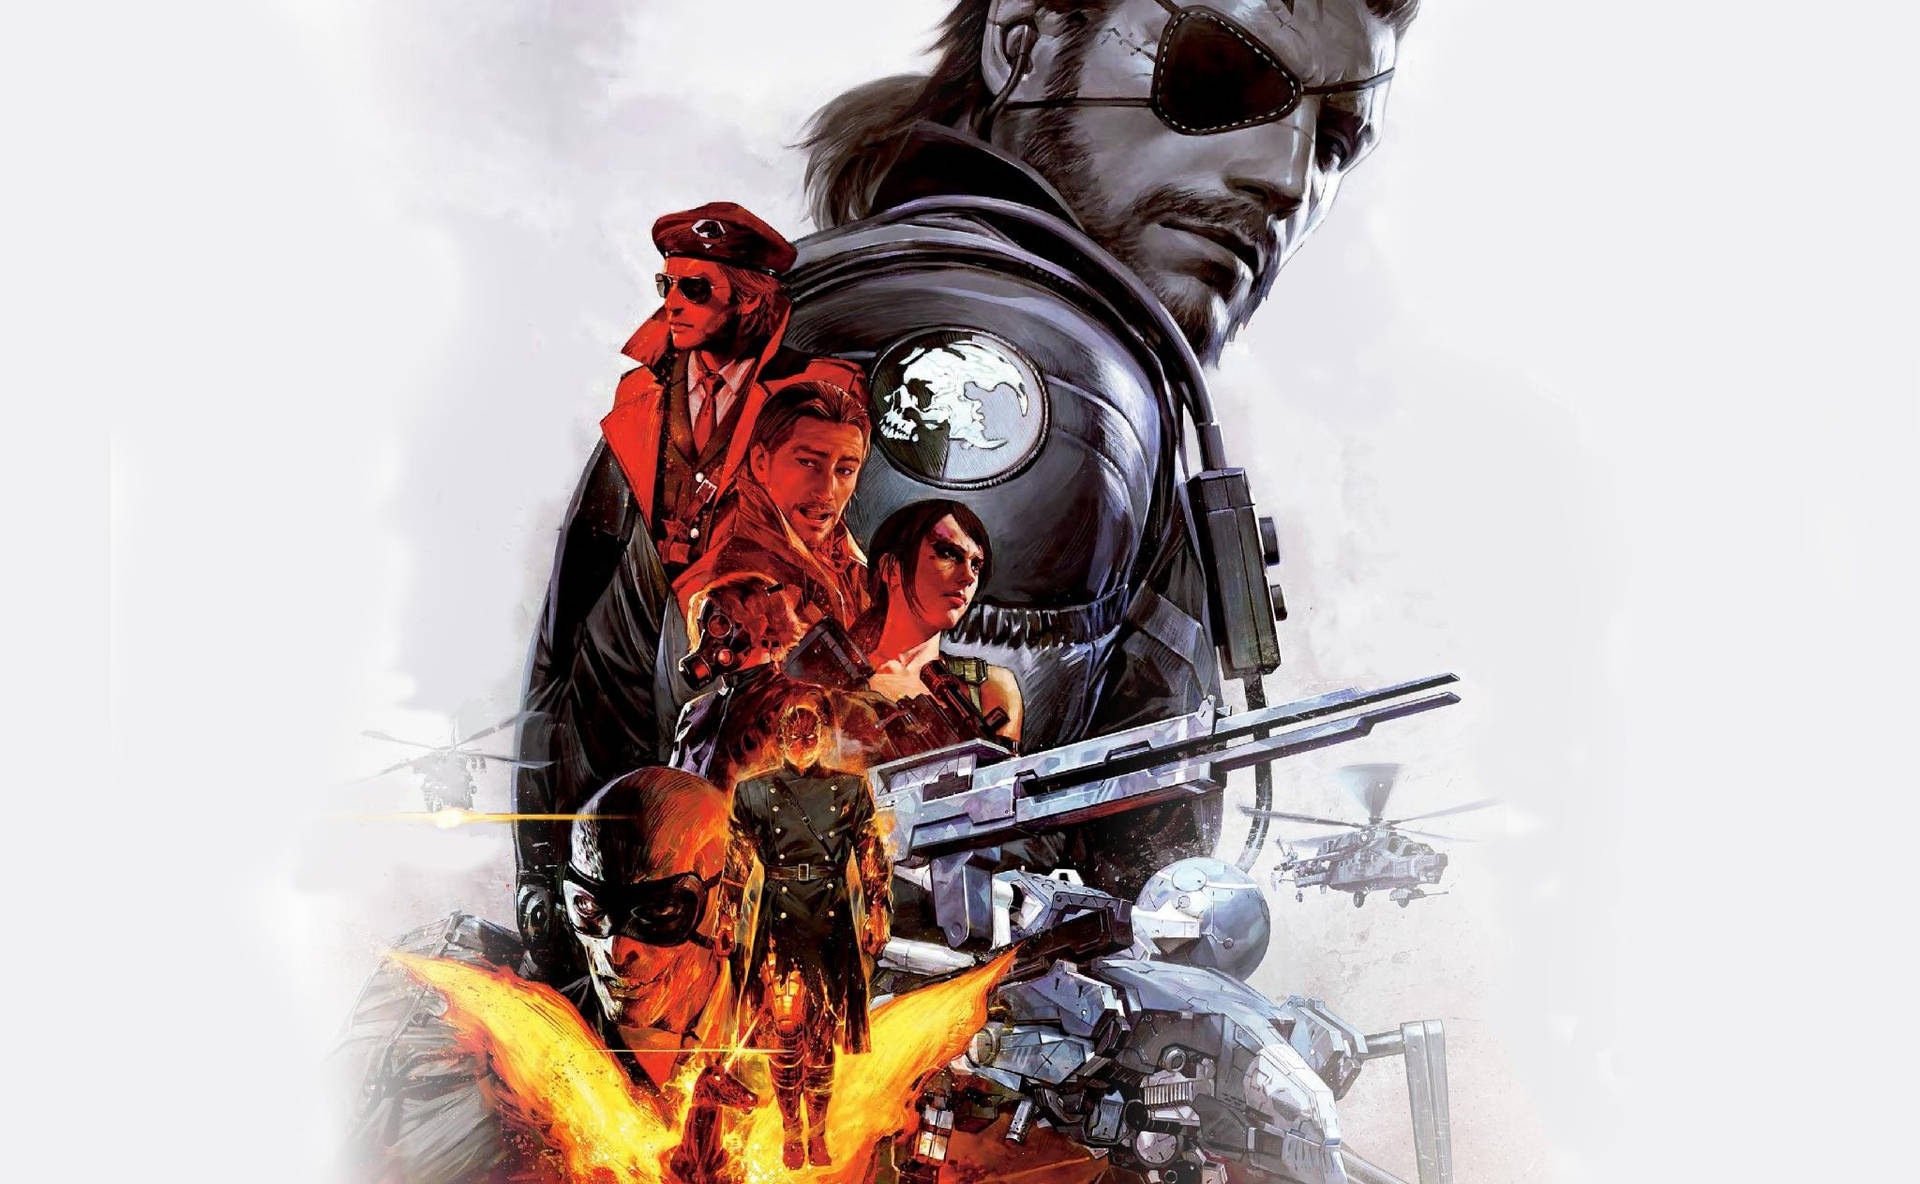 Feel the heat of Metal Gear Solid with this blazing artwork Wallpaper